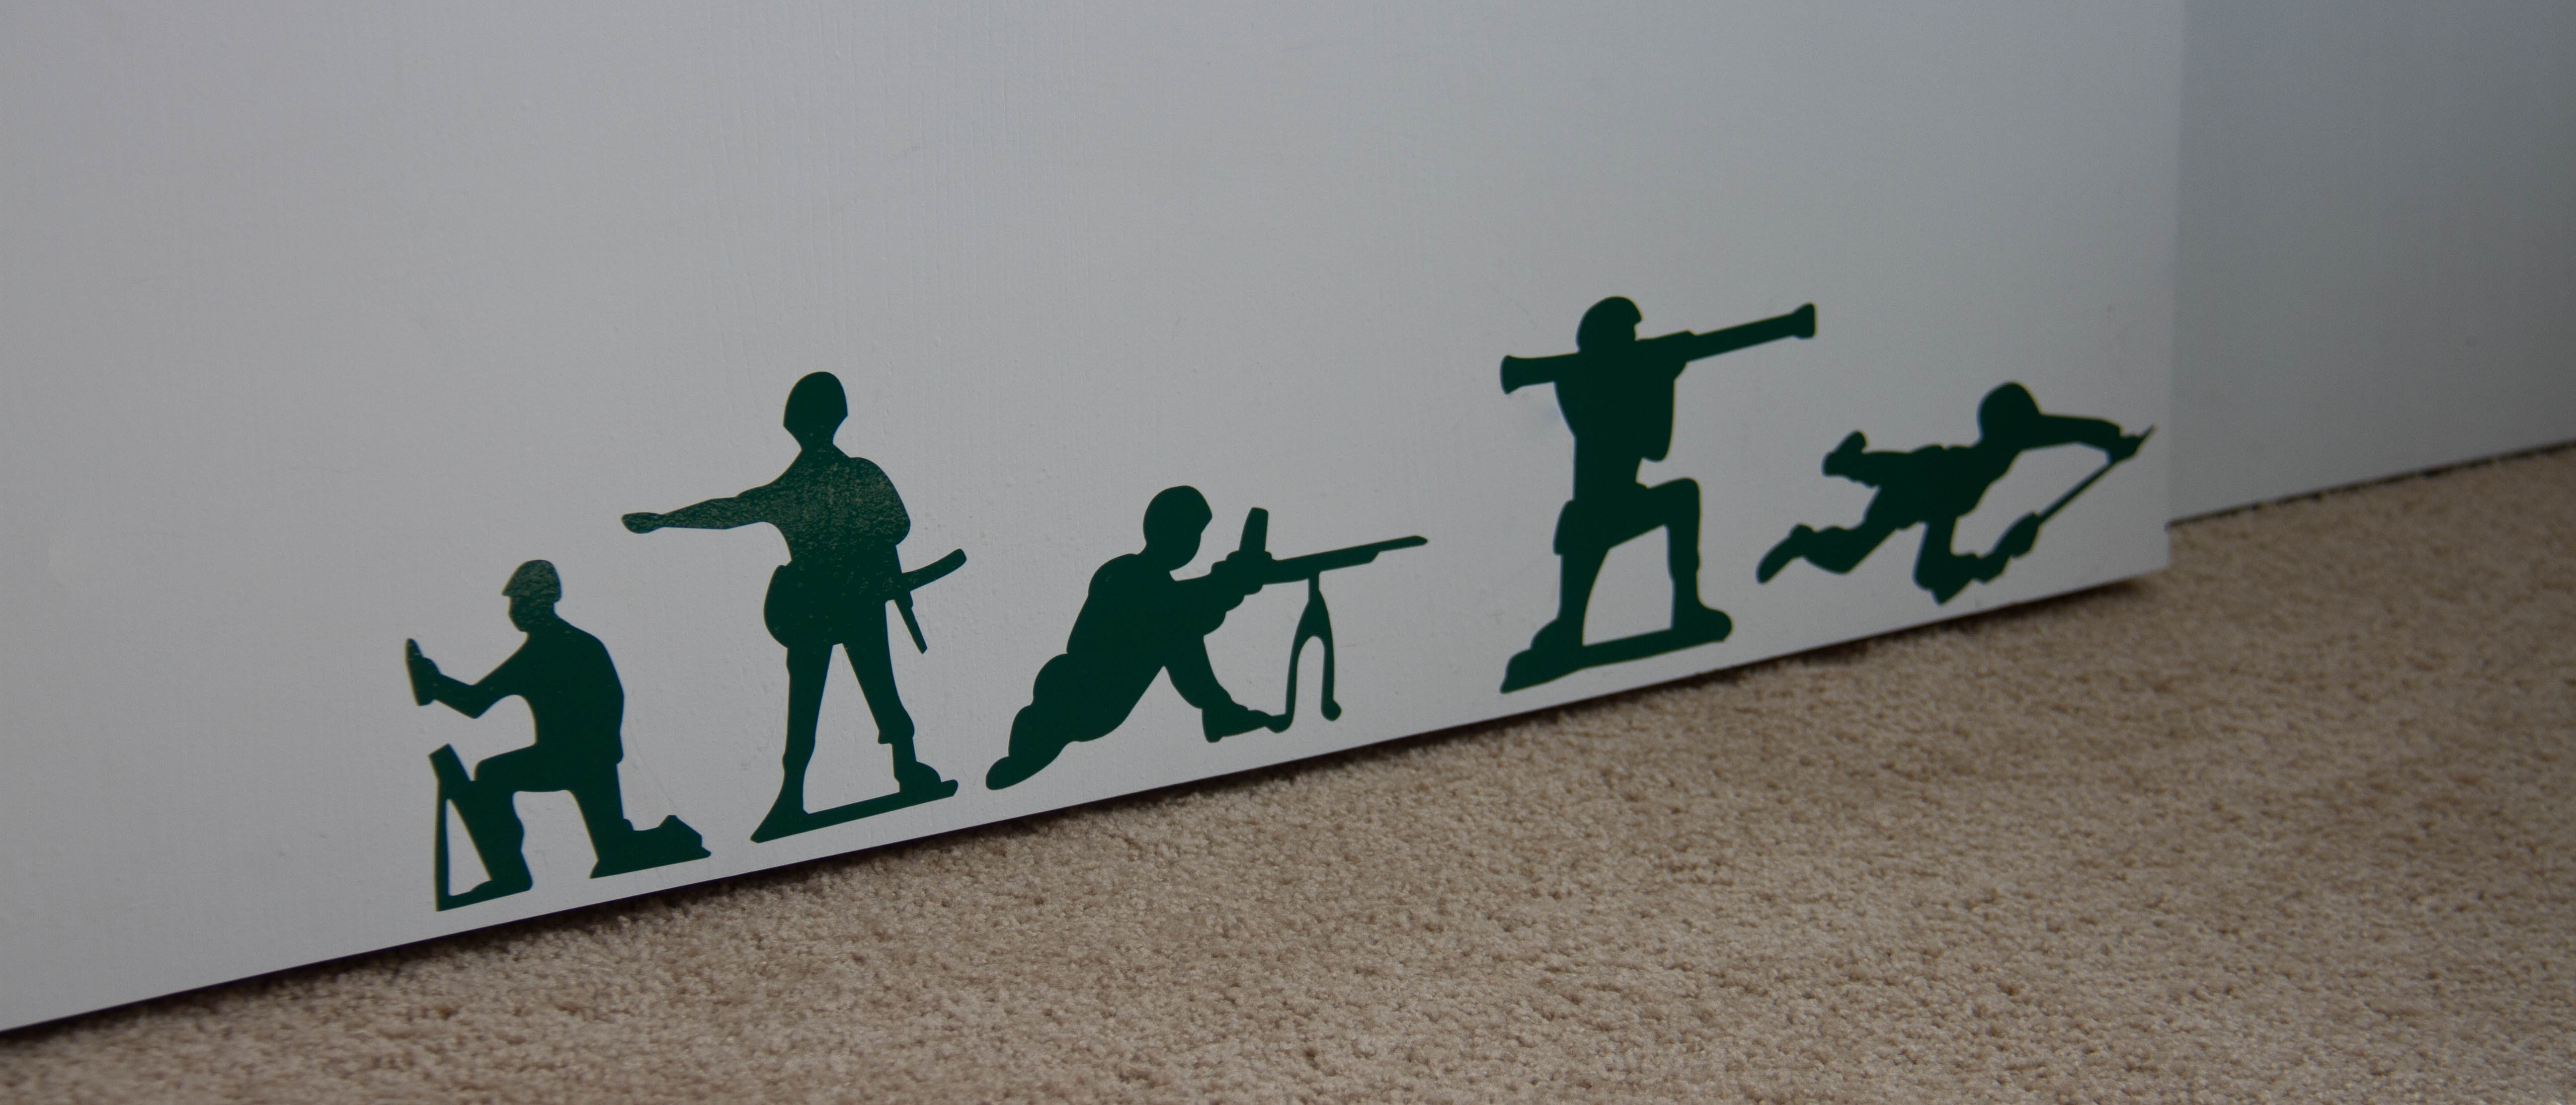 Army Men Wall Decal